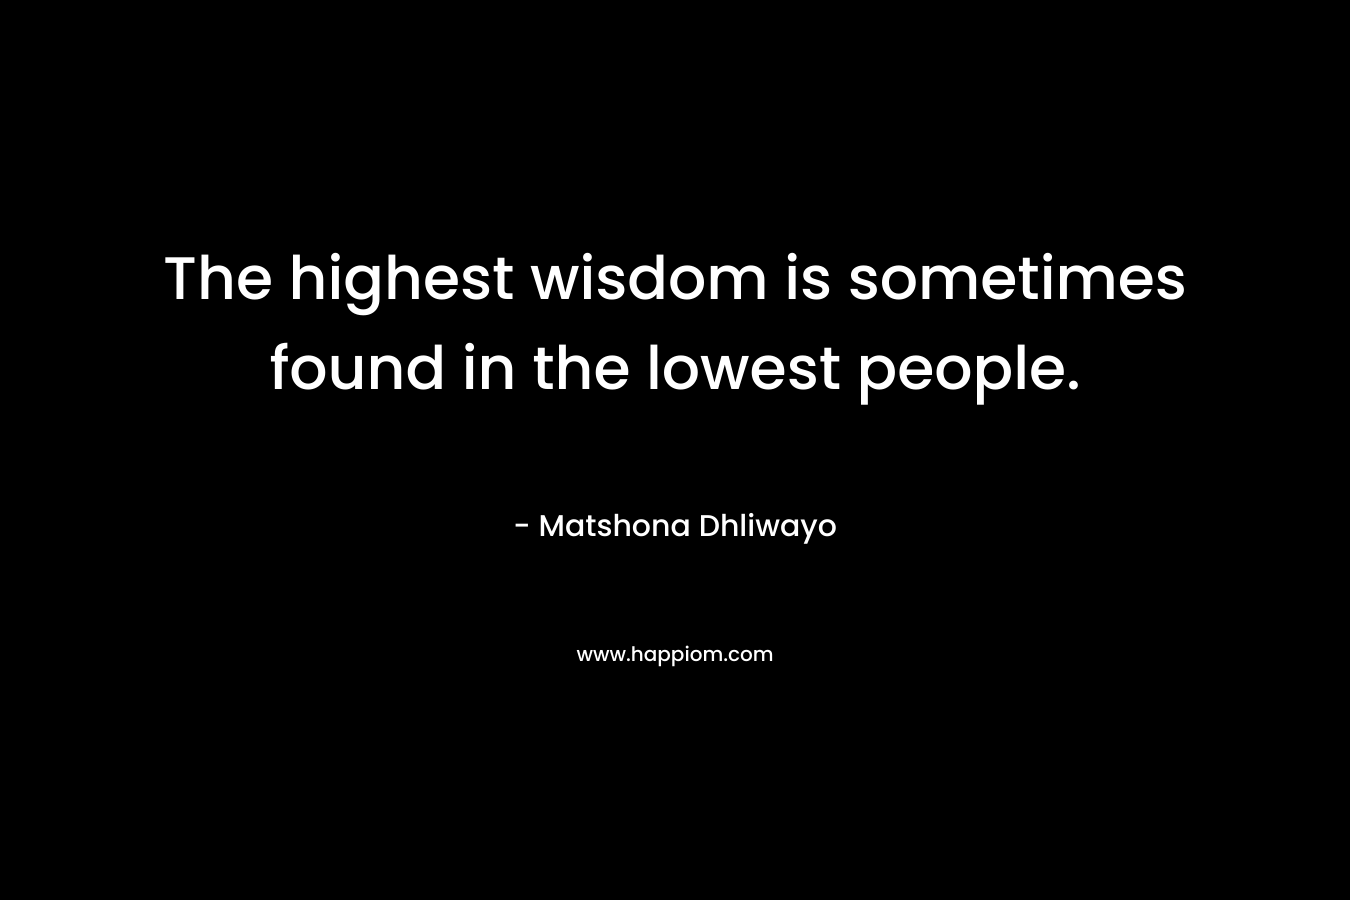 The highest wisdom is sometimes found in the lowest people. – Matshona Dhliwayo